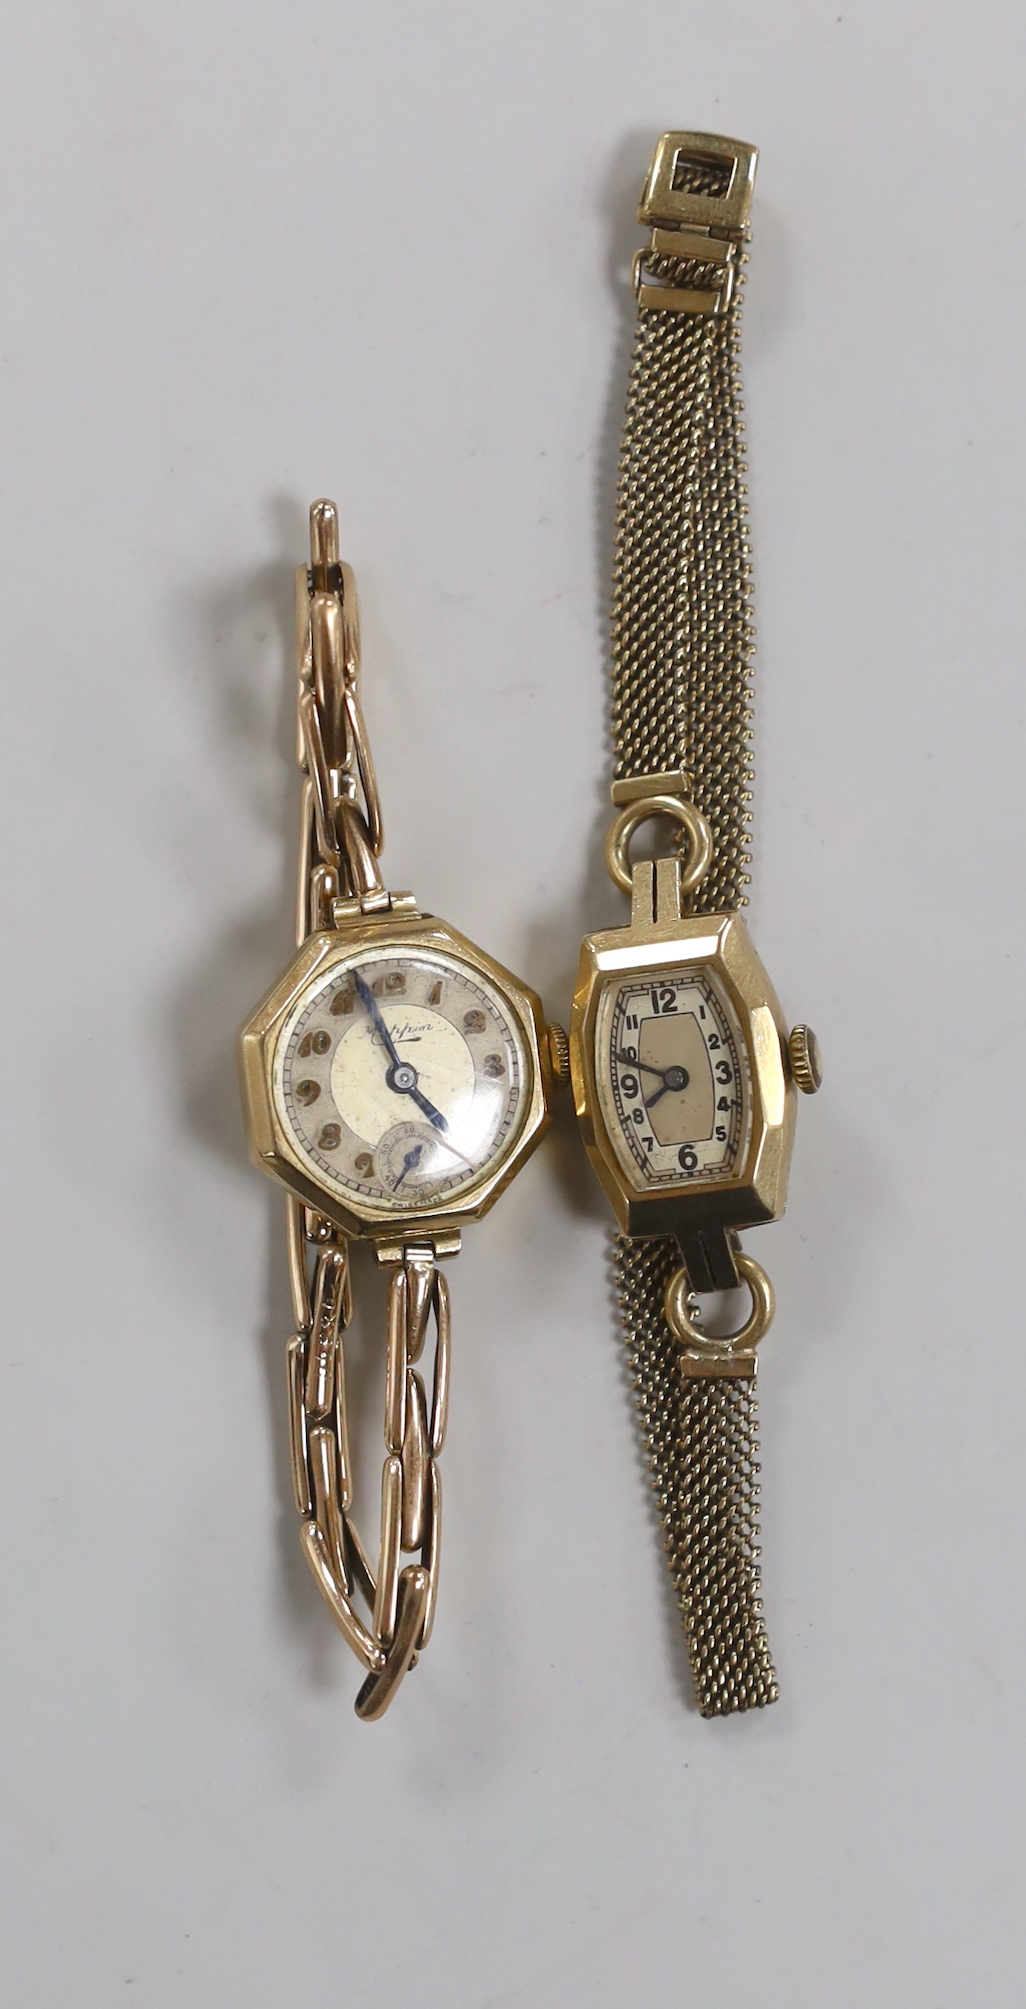 Two lady's 9ct manual wind wrist watches, one with 9ct gold bracelet, the other retailed by Mappin - Image 2 of 3